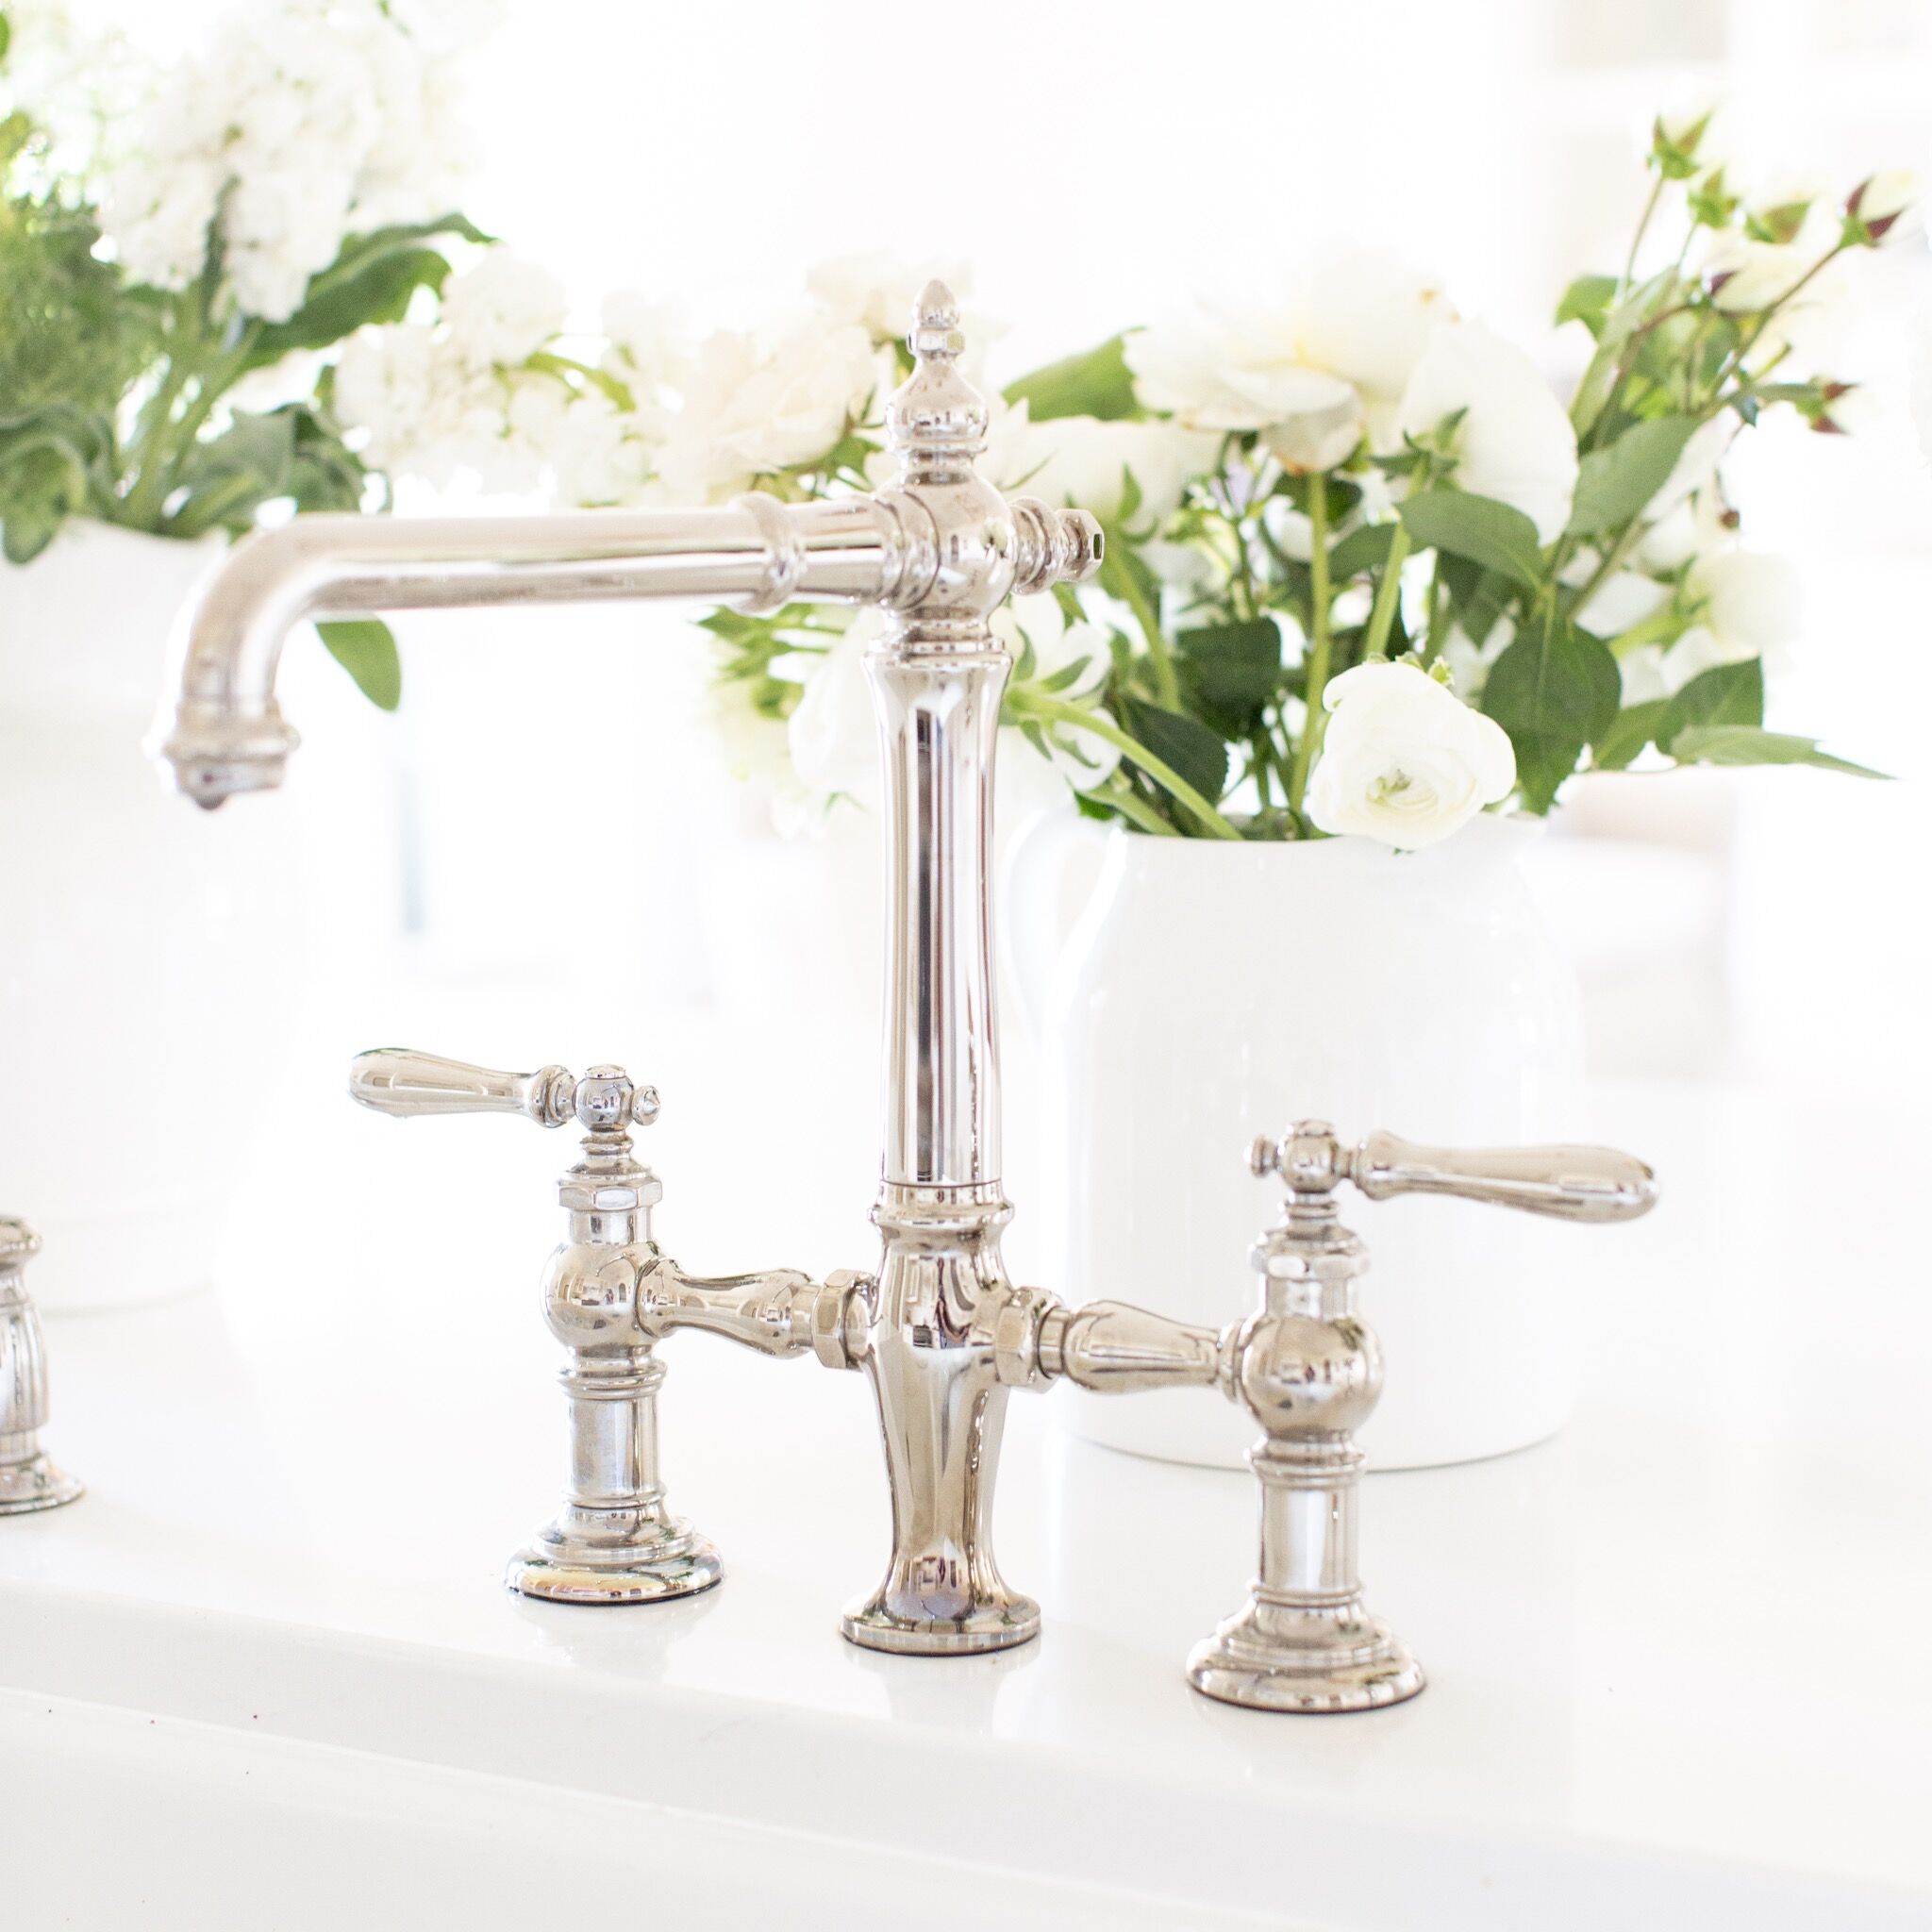 Fraiche Nutrition White Kitchen Reveal Kohler Artifacts faucet in polished nickel